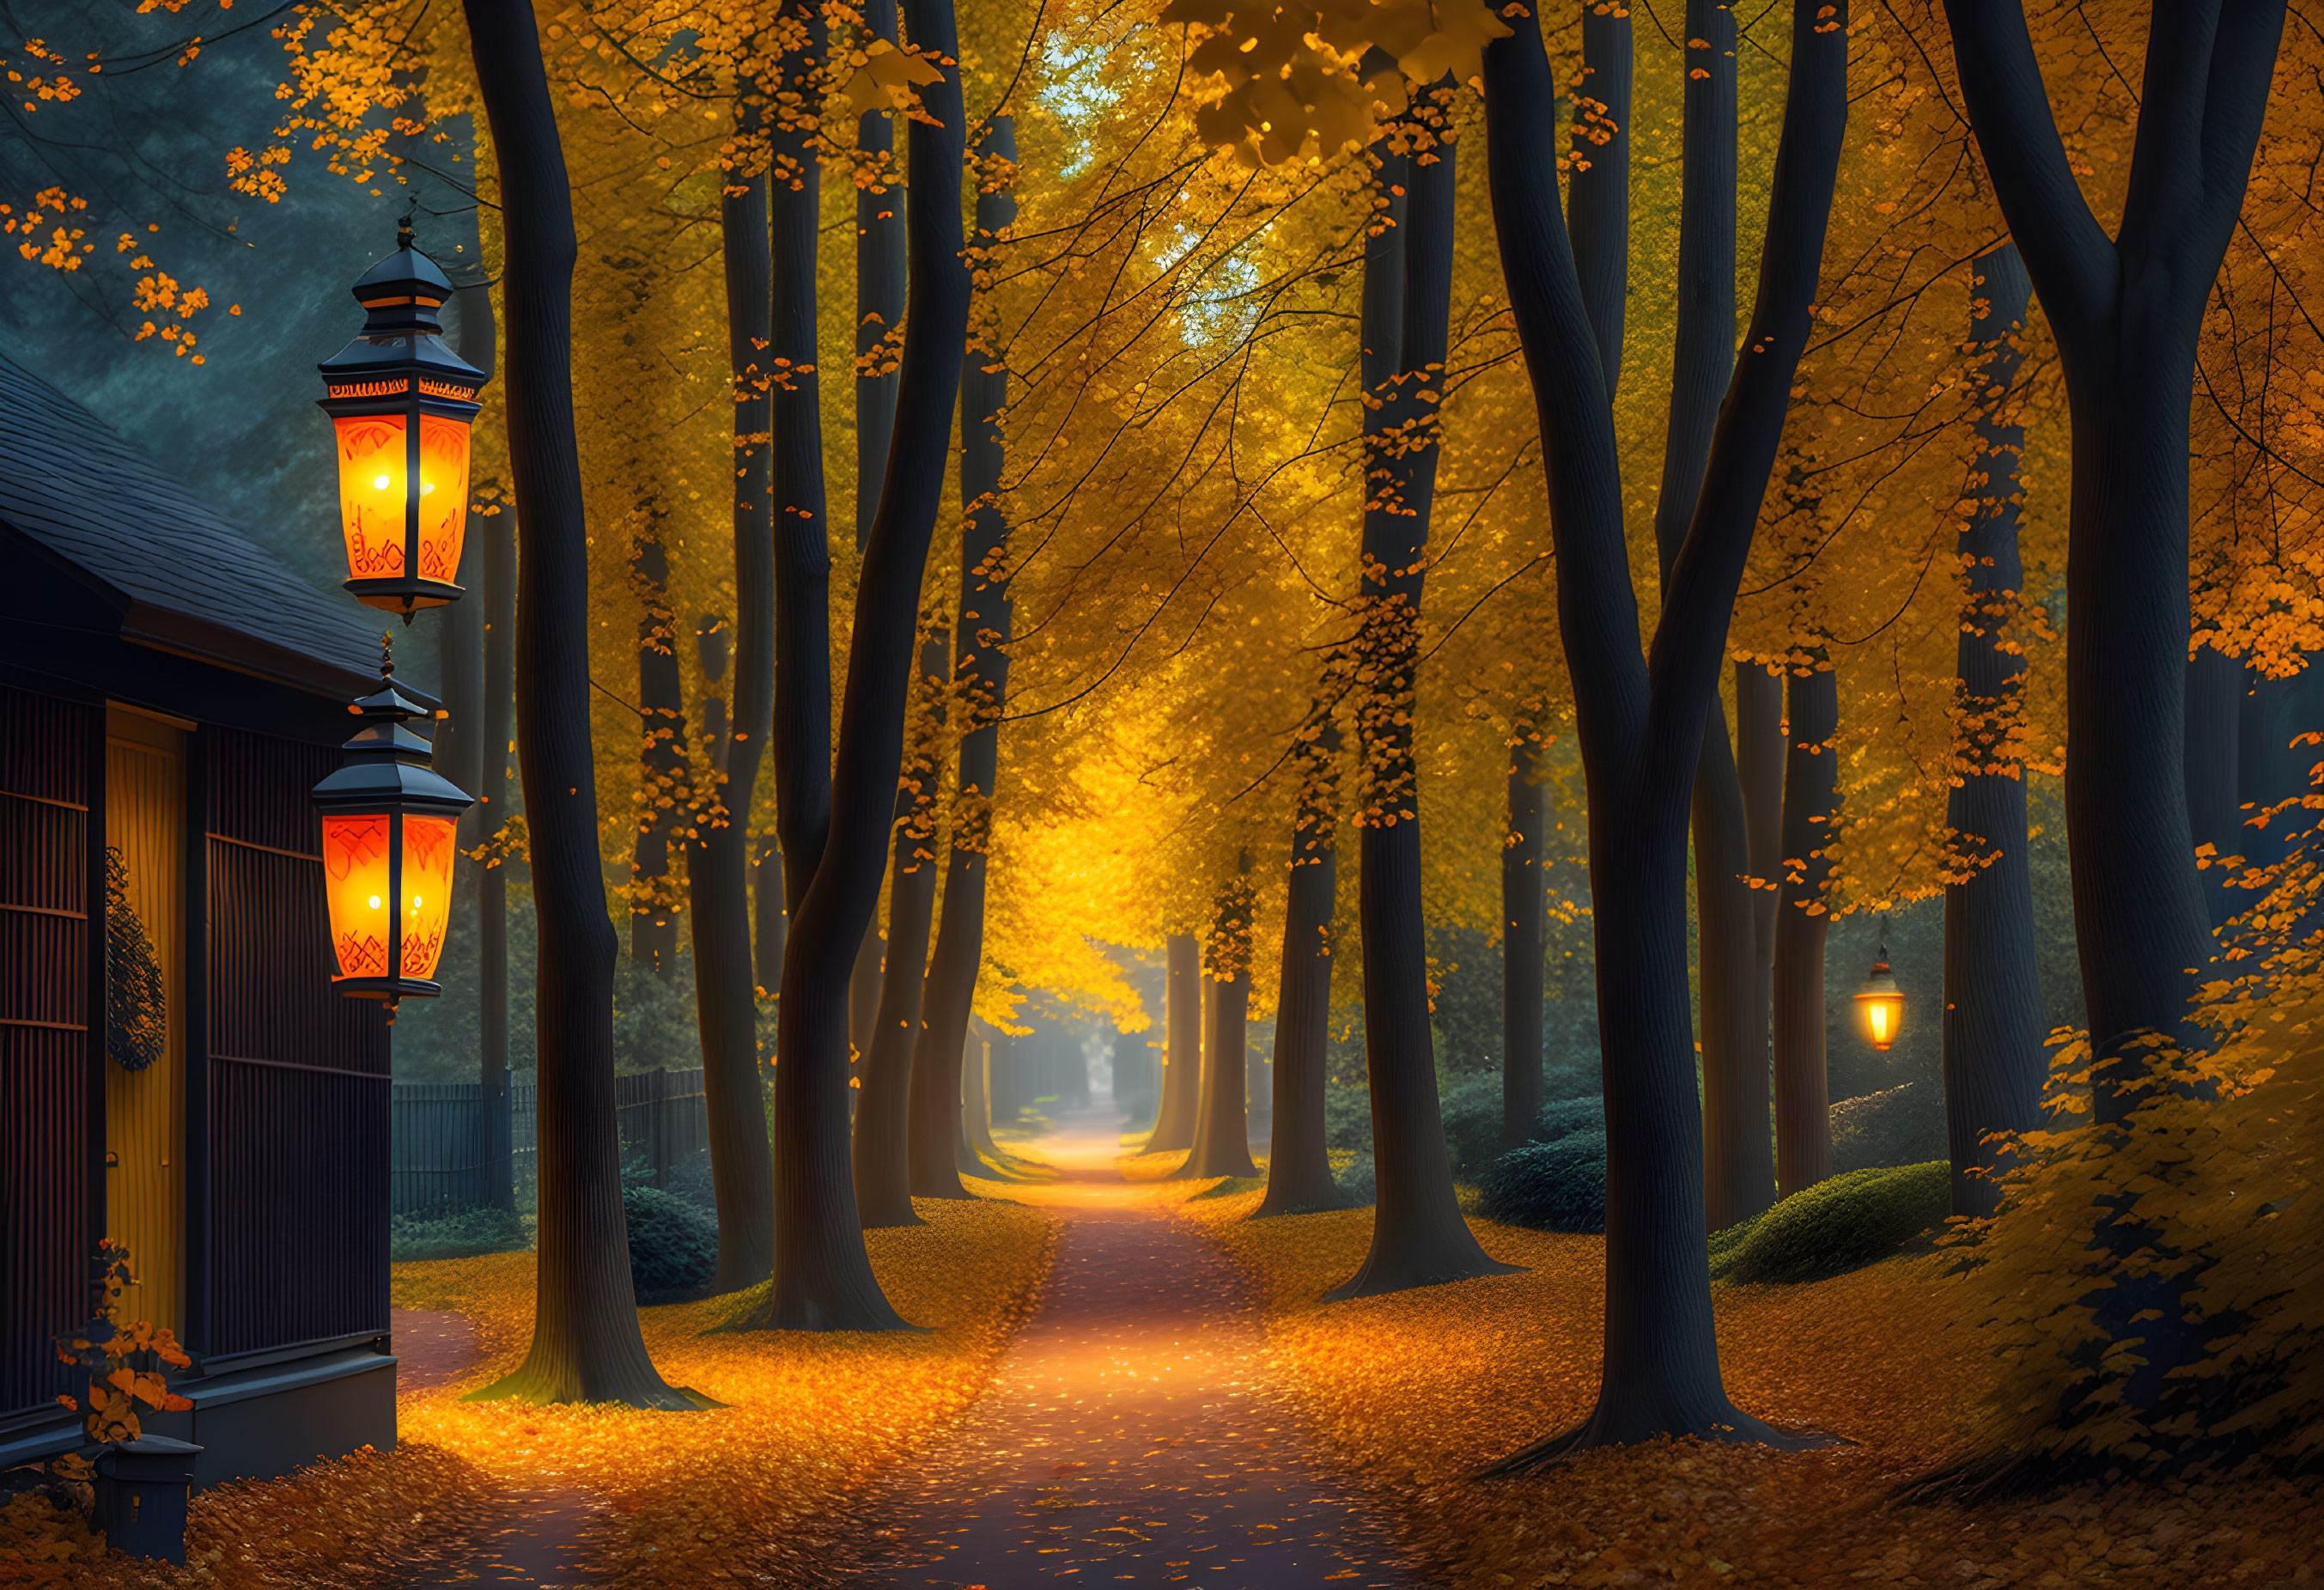 Lanterns in the wood